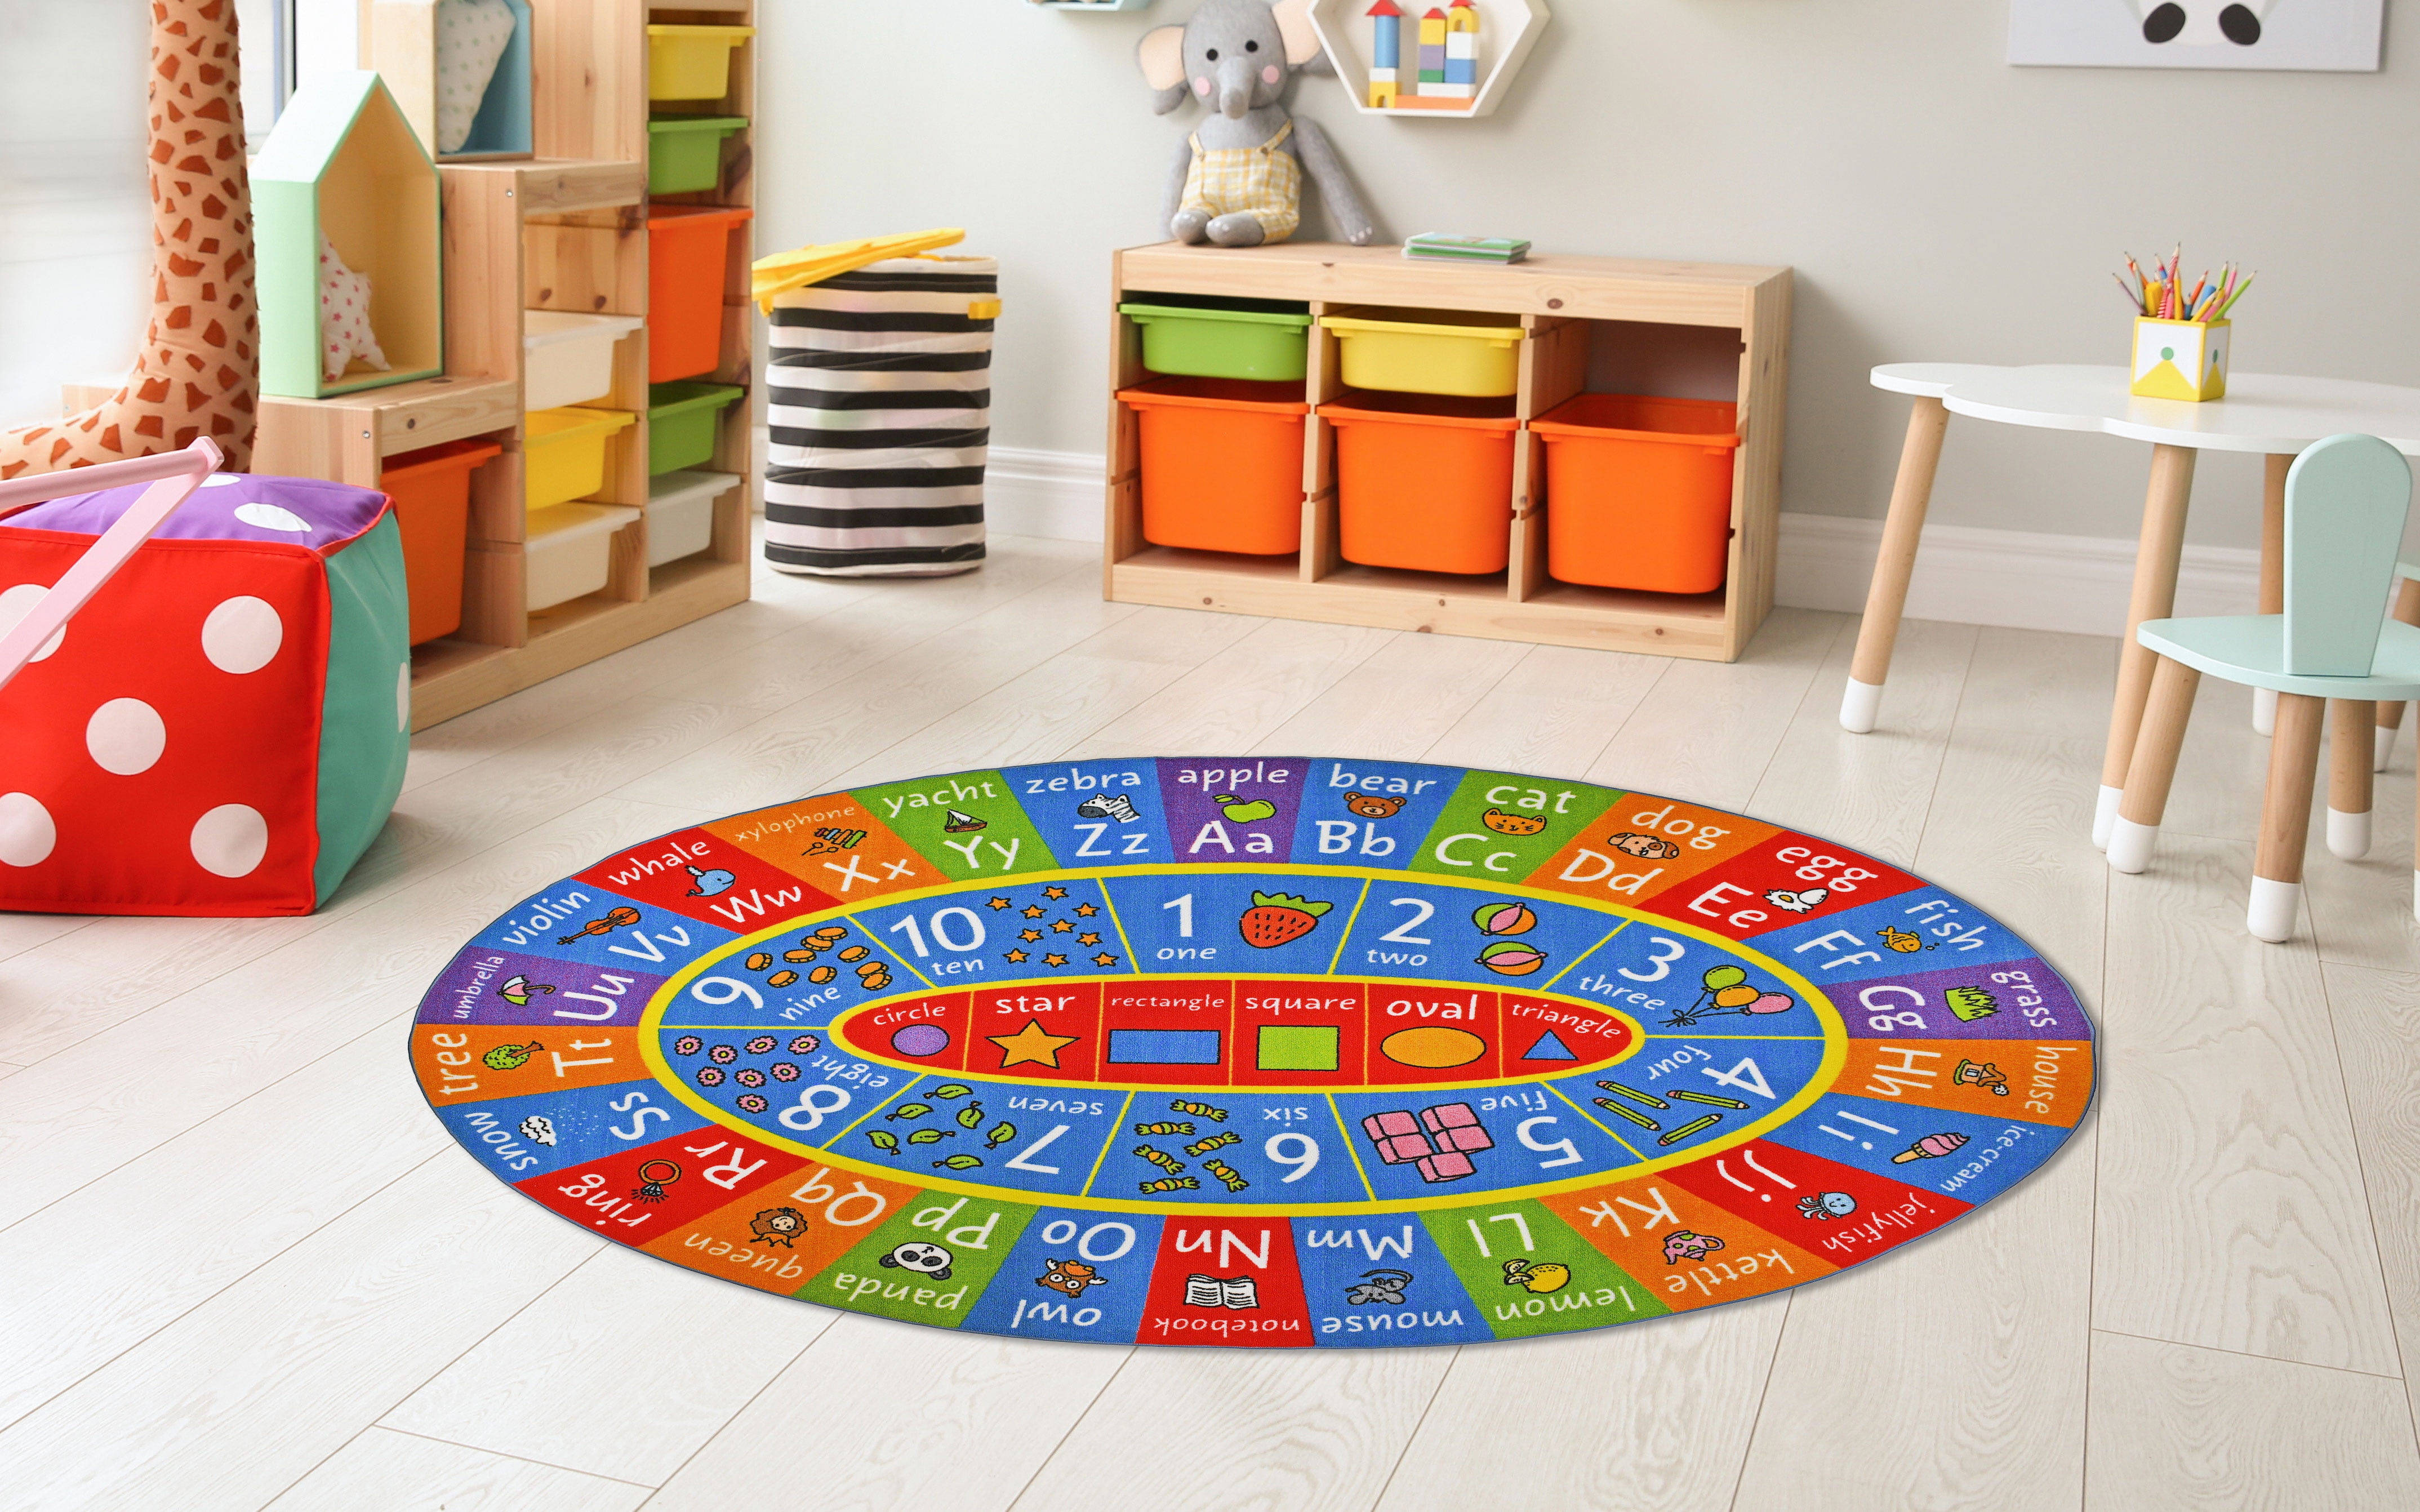 KC Cubs Playtime Collection ABC Alphabet, Numbers and Shapes Educational  Learning & Game Area Oval Rug Carpet for Kids and Children Bedrooms and